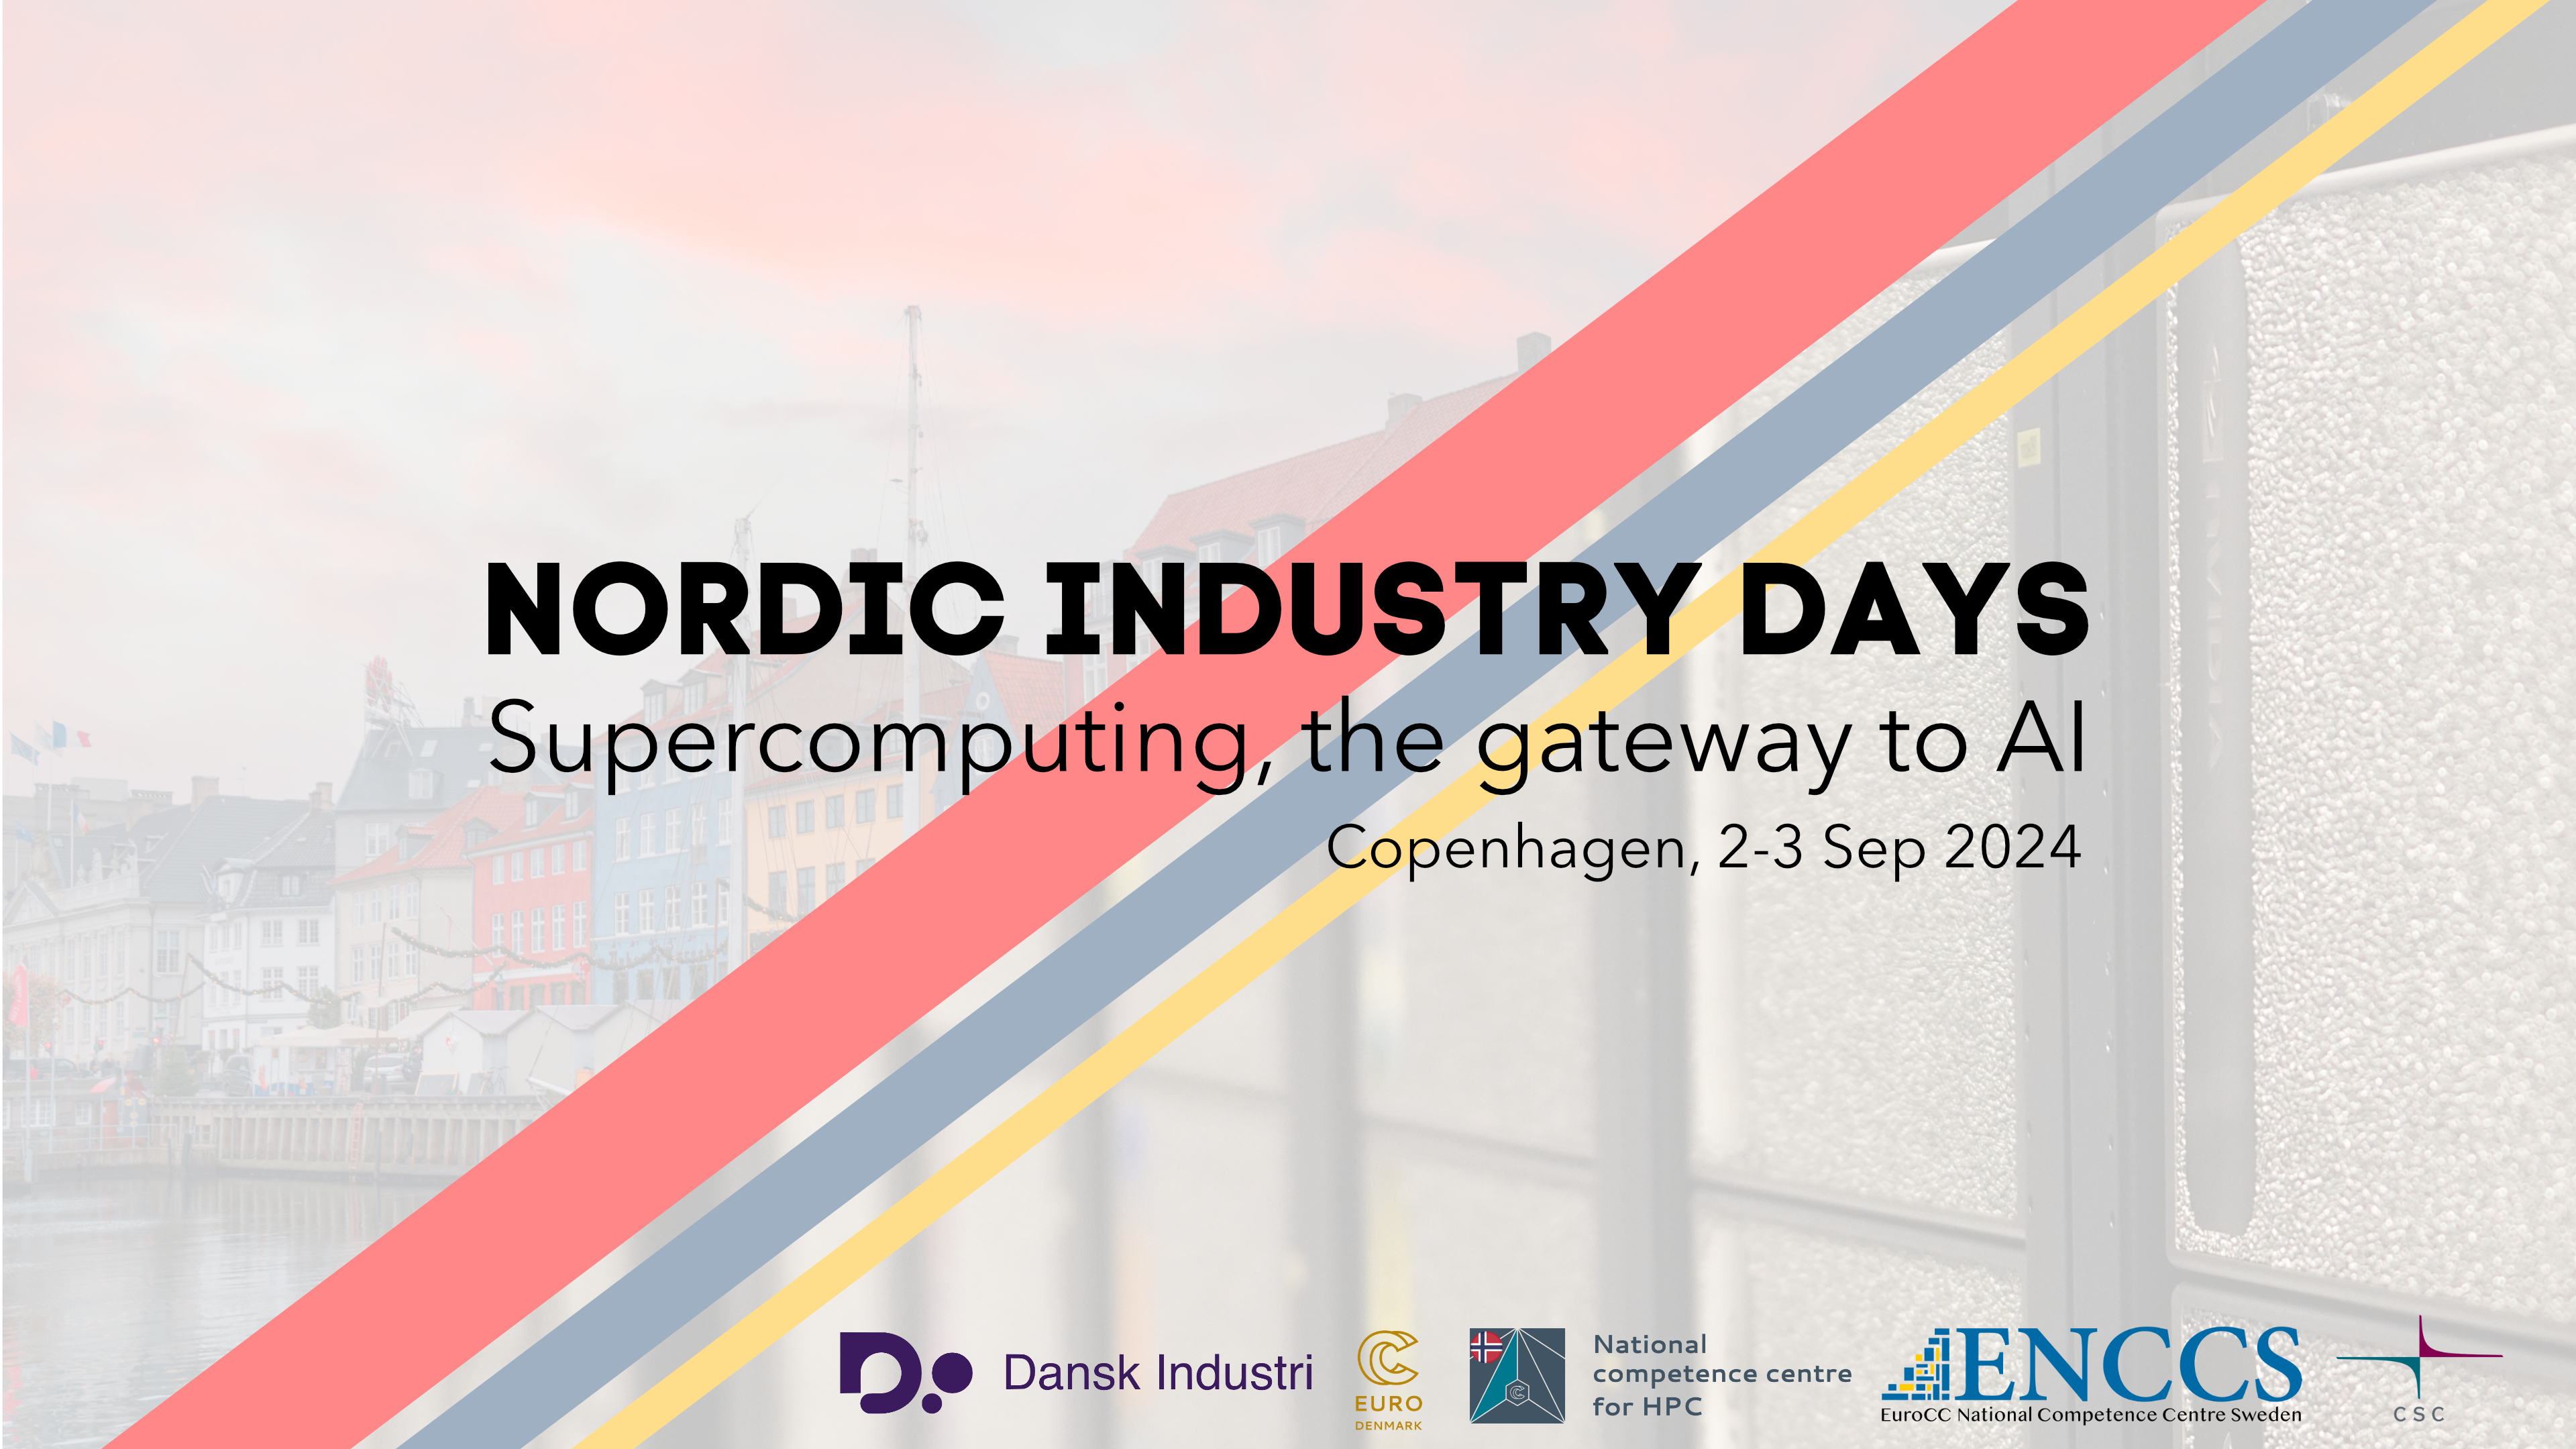 Nordic industry days: Supercomputing, the gateway to AI